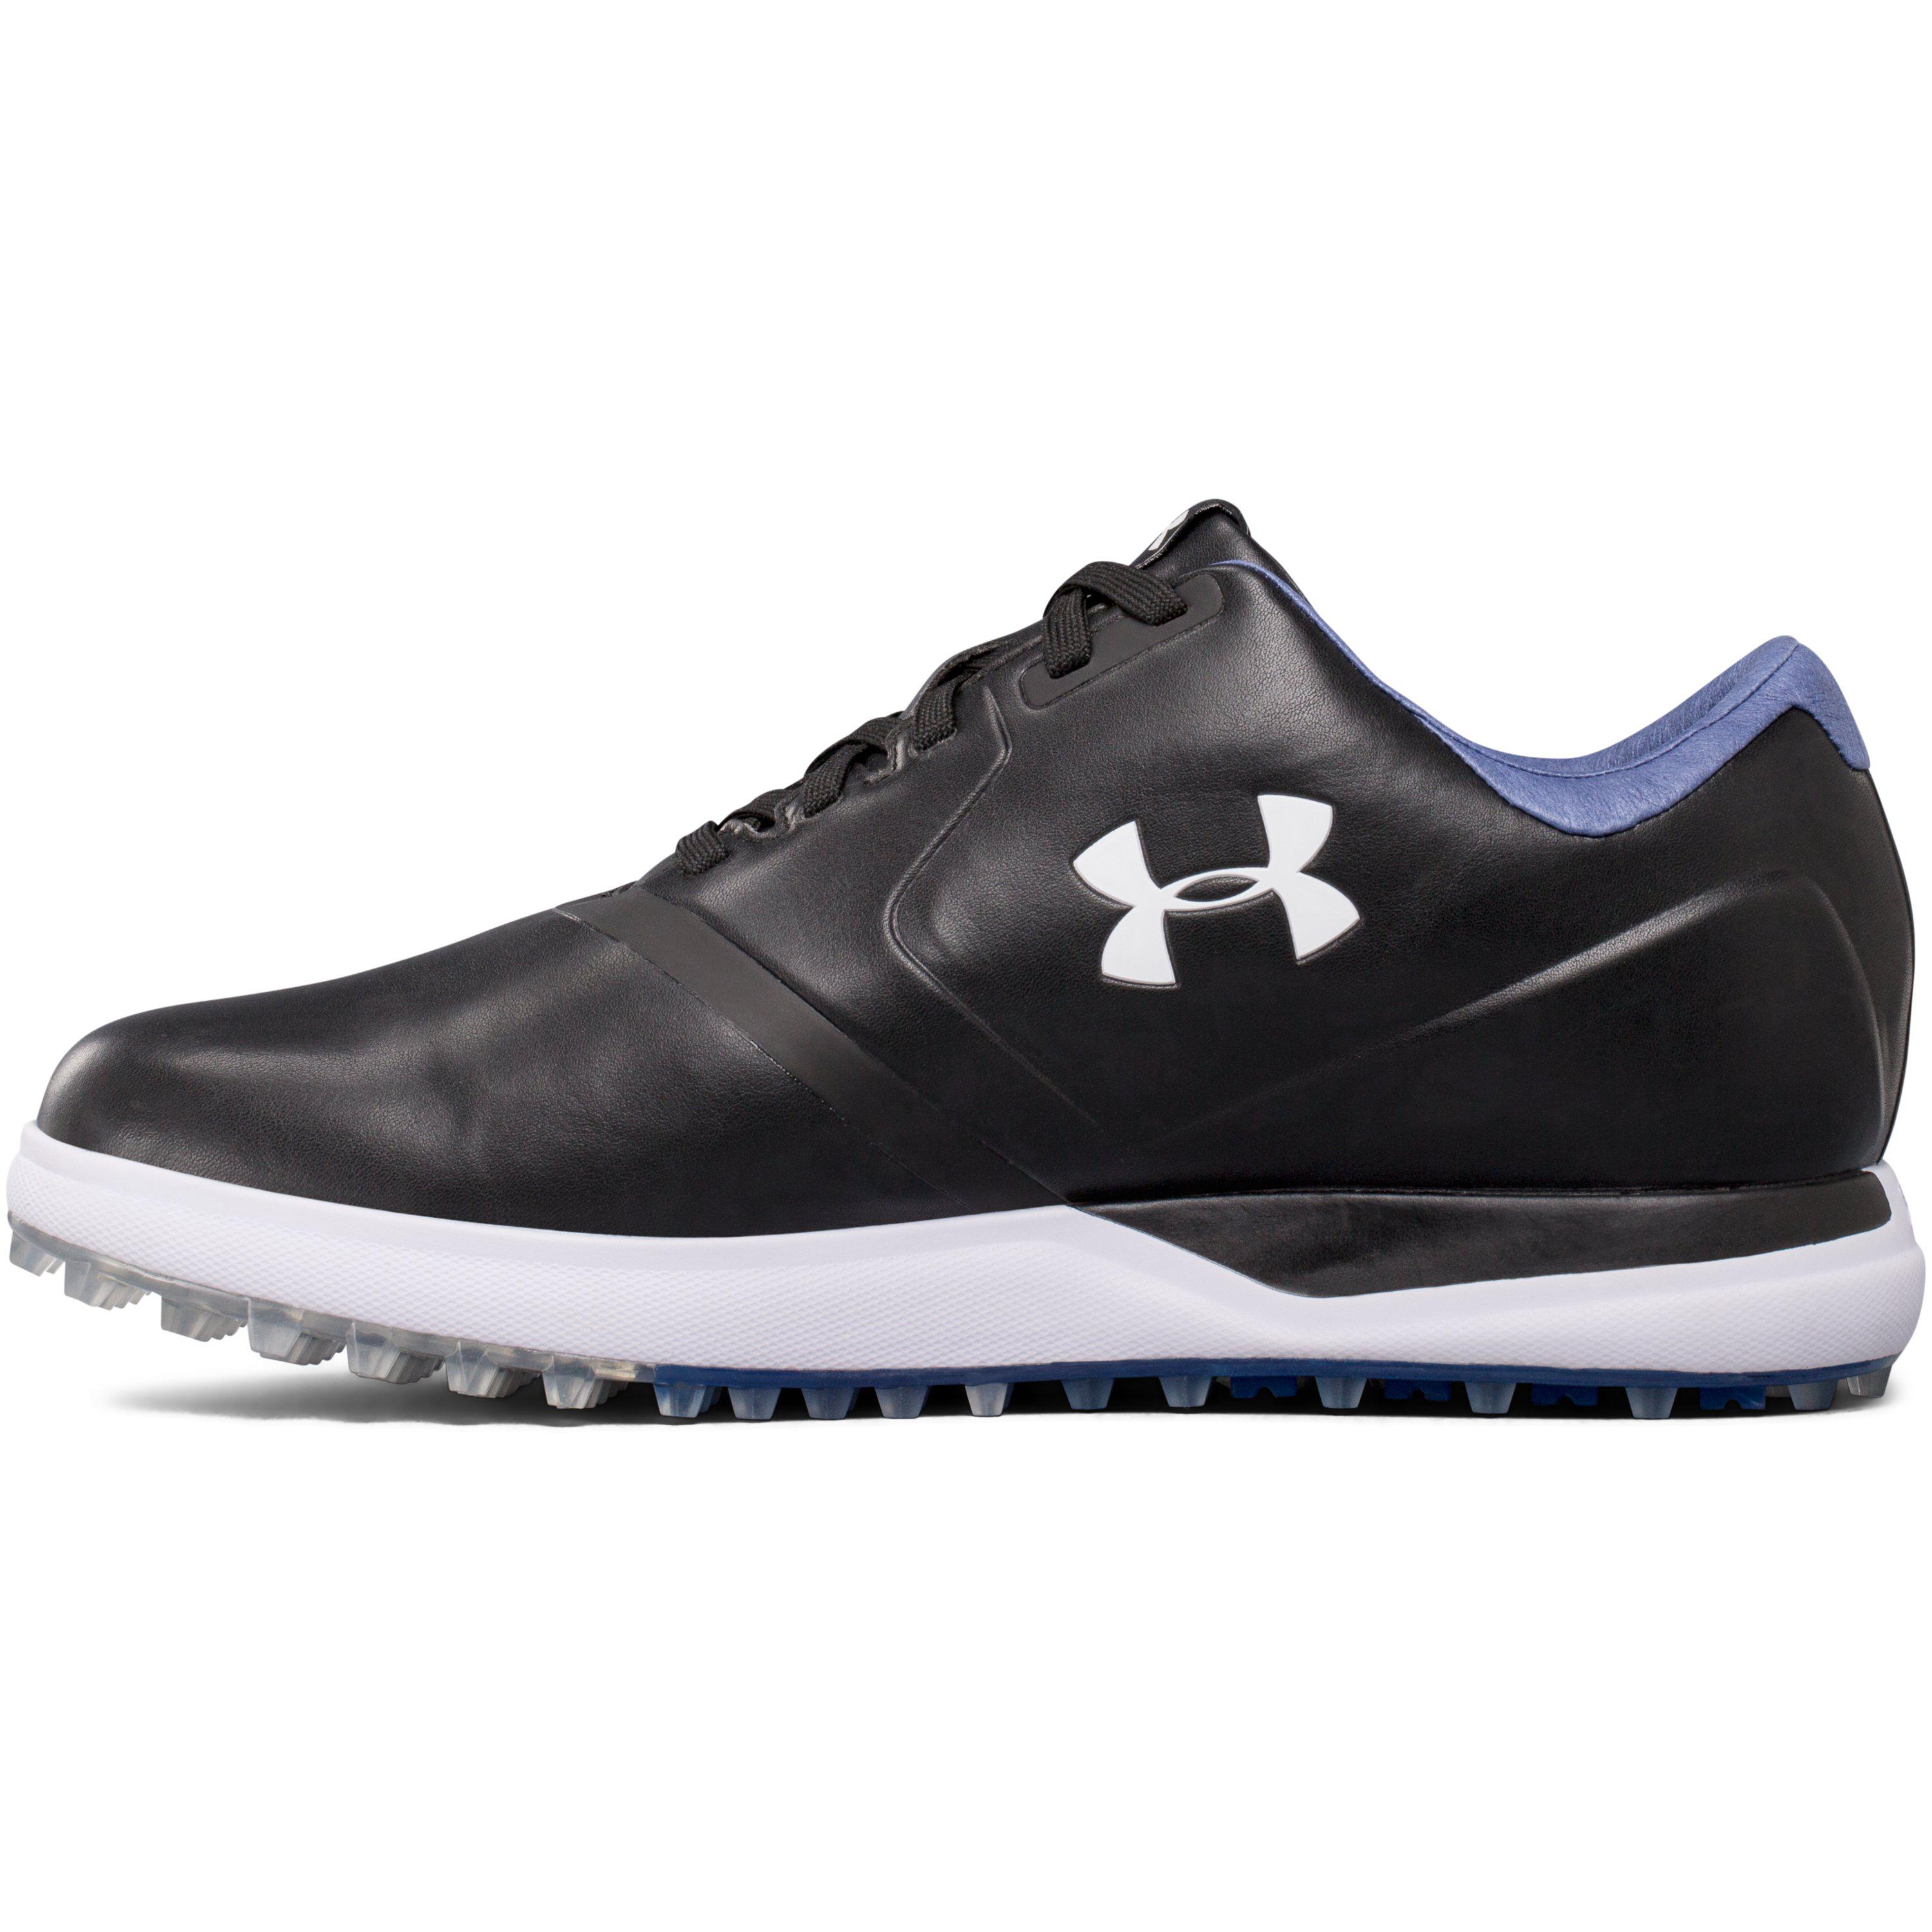 Under Armour Men's Ua Performance Spikeless – Extra Wide Golf Shoes in